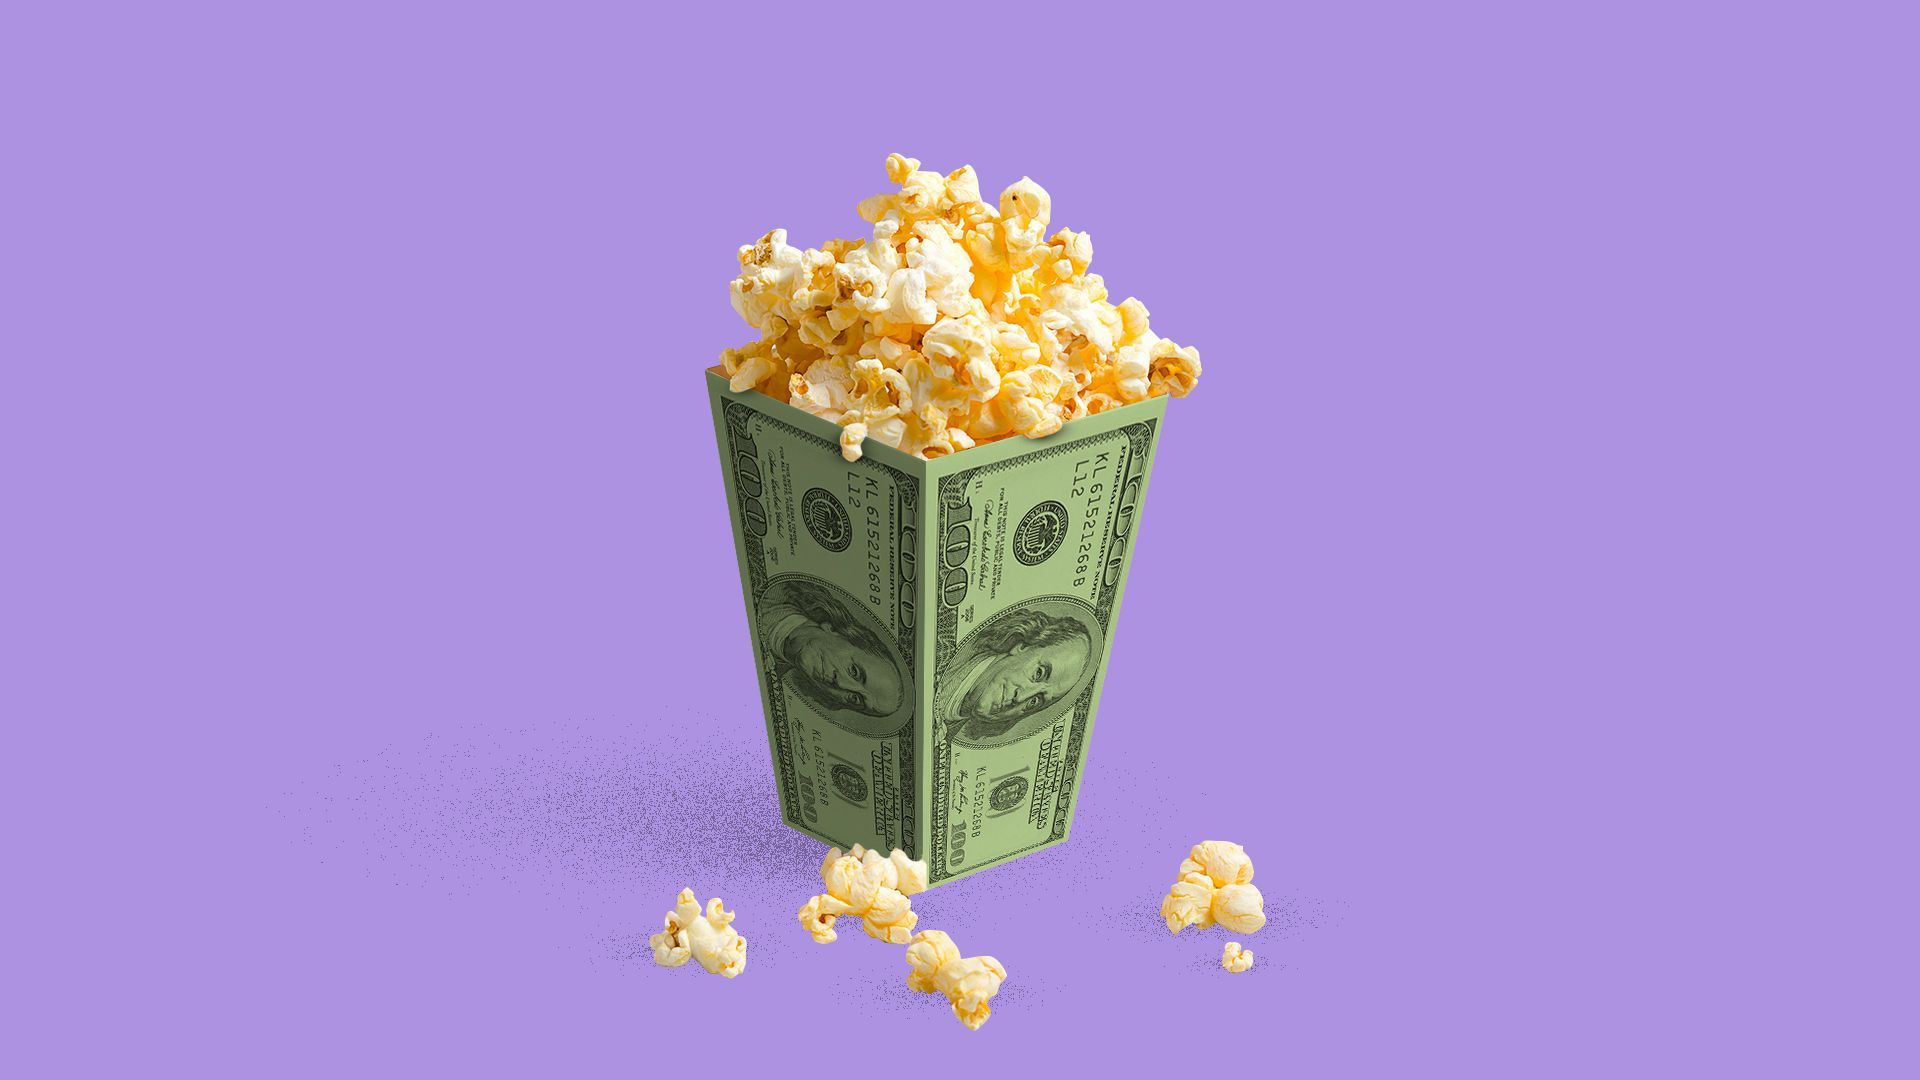 Illustration of a box of popcorn with hundred dollar bills as the sides that is overflowing with popcorn.